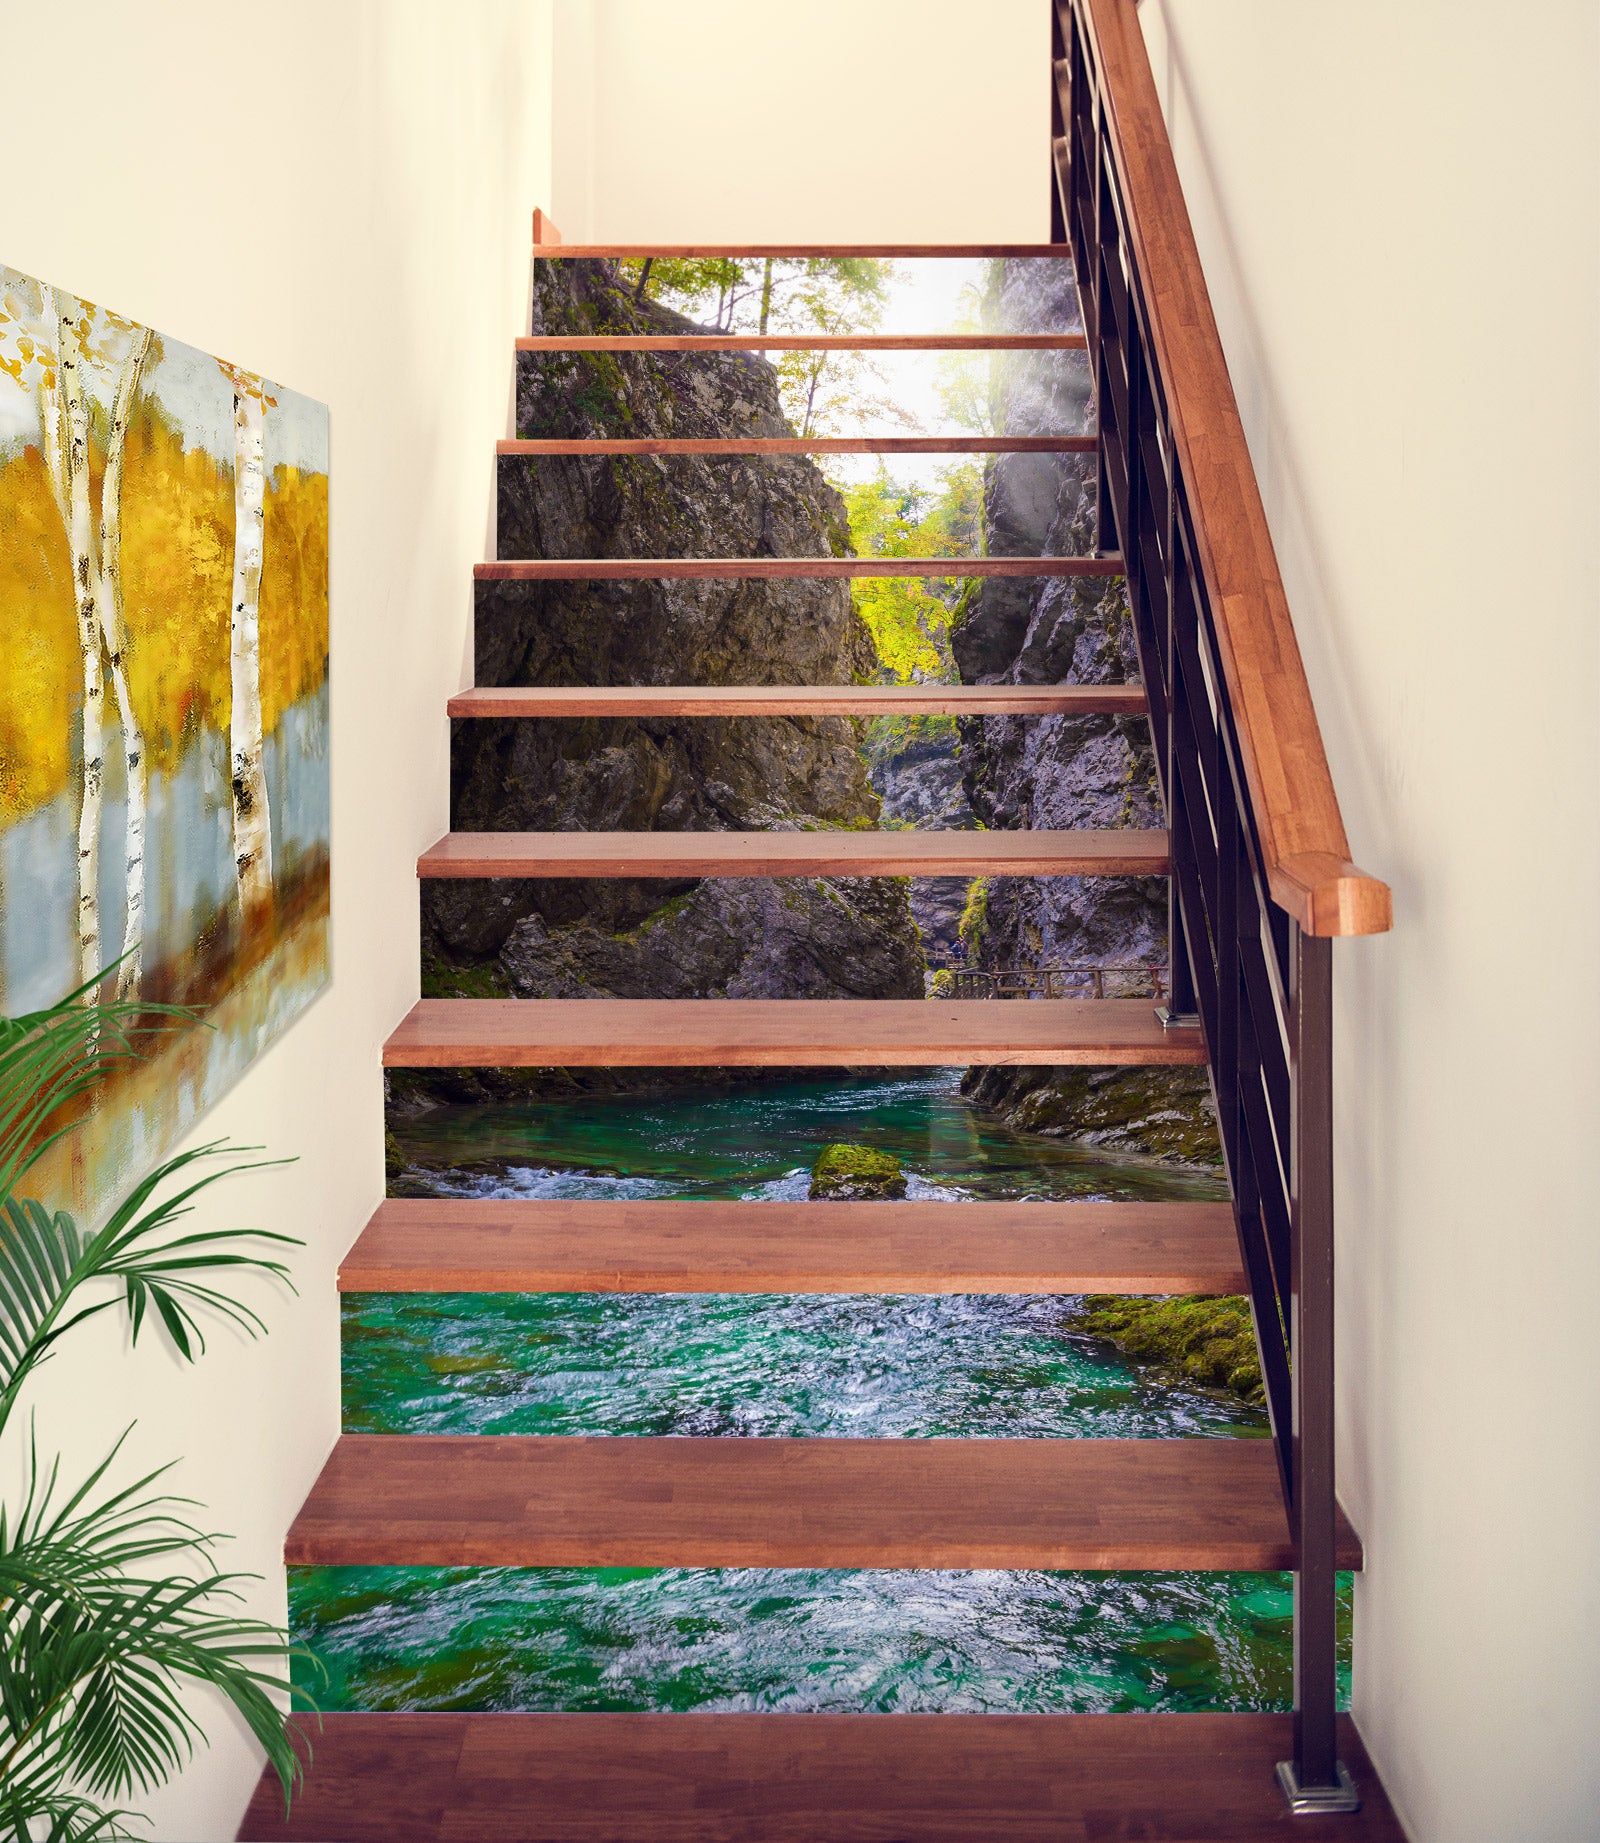 3D Comfortable Landscape In The Mountains 457 Stair Risers